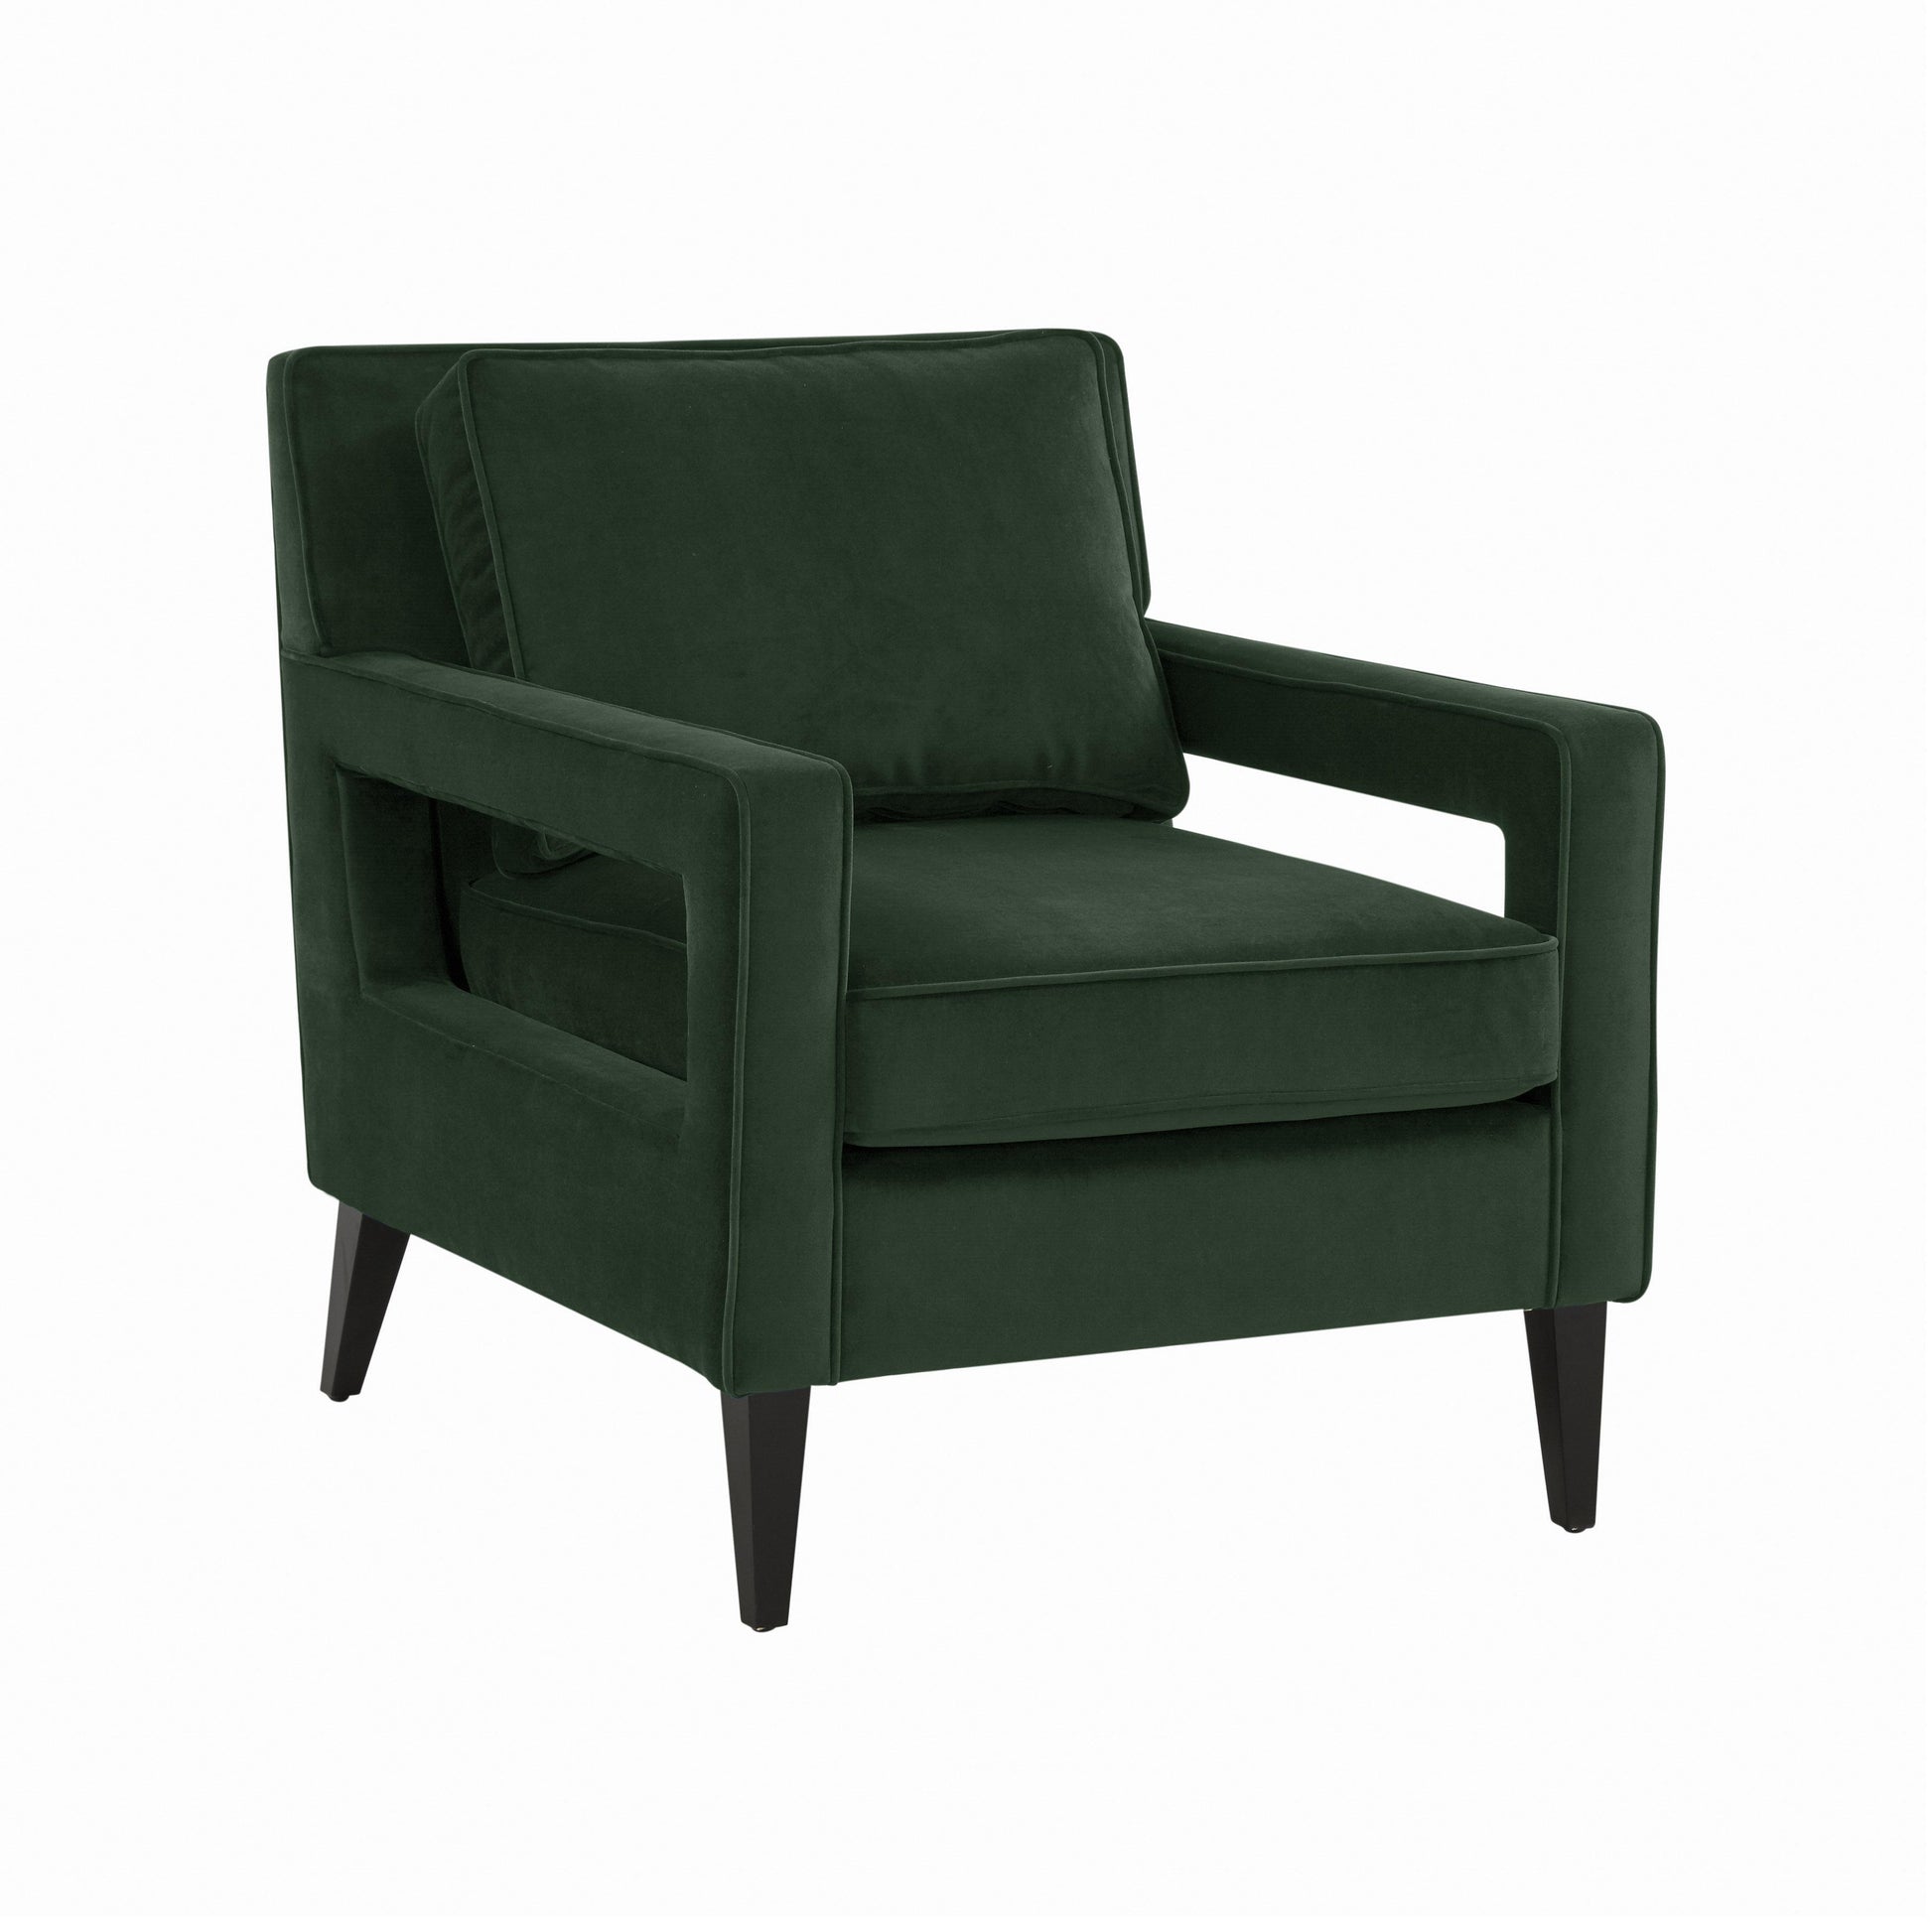 Luna Emerald Green Accent Chair by TOV